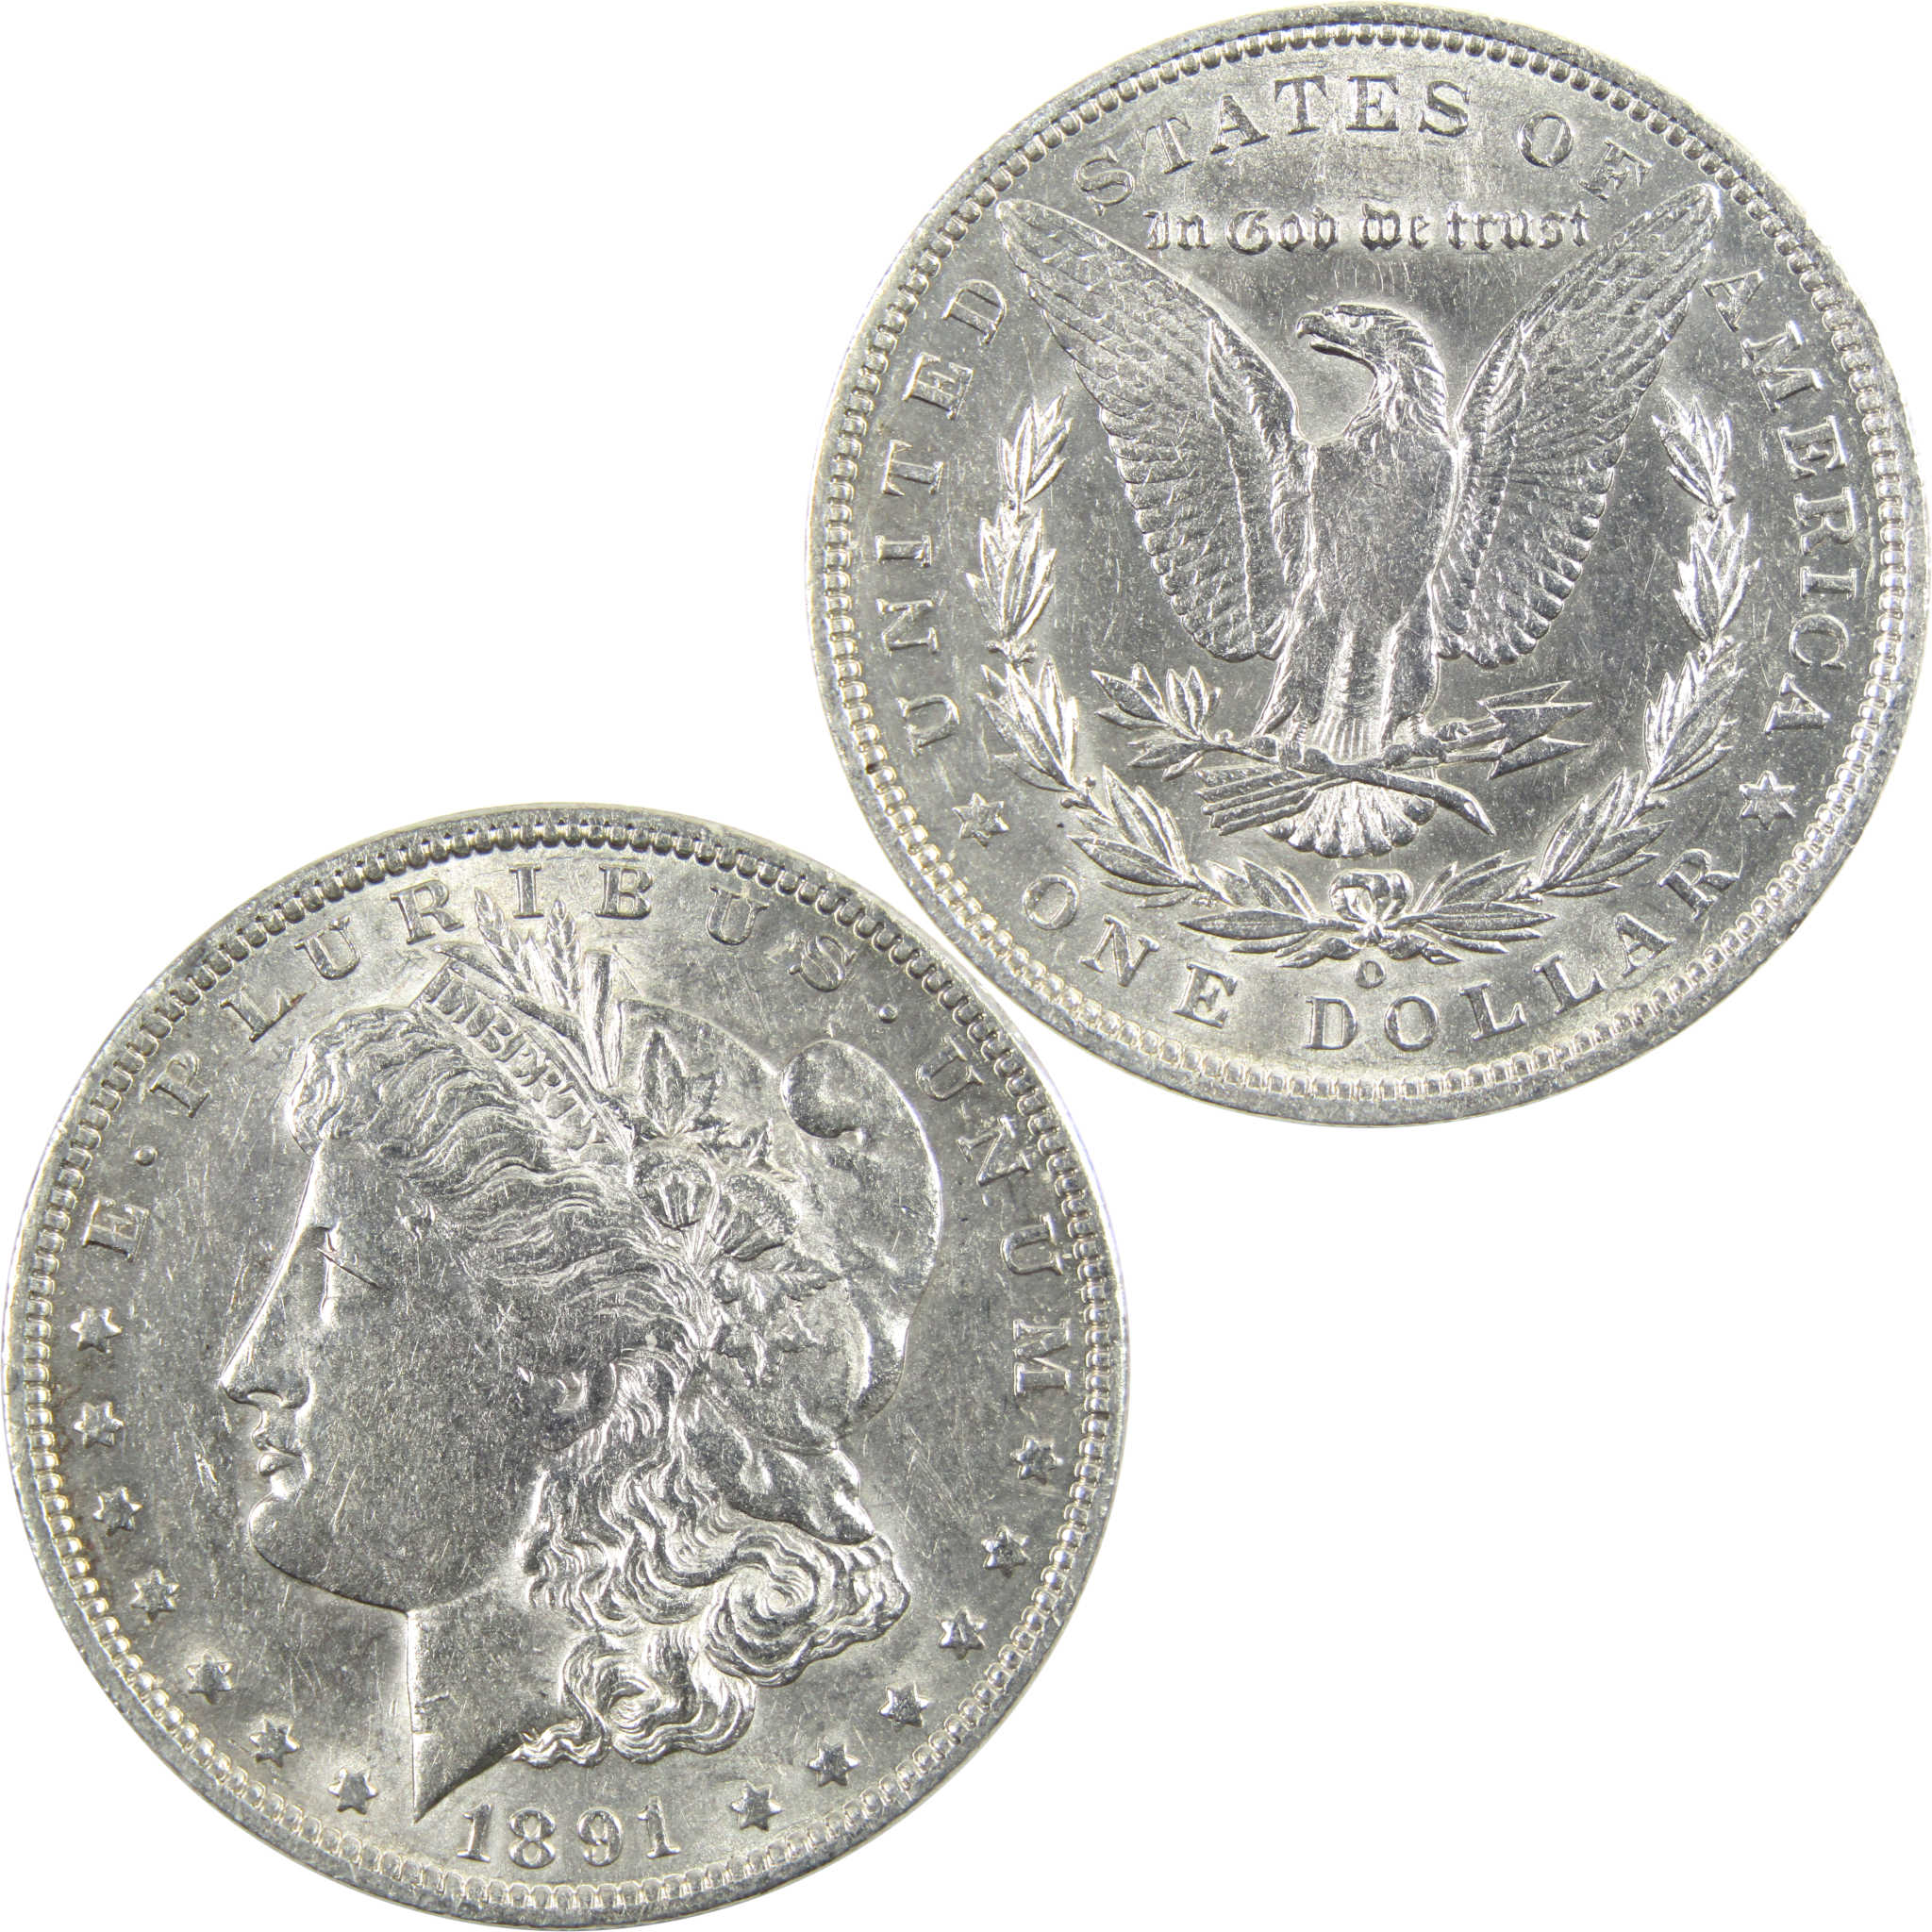 1891 O Morgan Dollar XF EF Extremely Fine 90% Silver $1 Coin SKU:I5907 - Morgan coin - Morgan silver dollar - Morgan silver dollar for sale - Profile Coins &amp; Collectibles